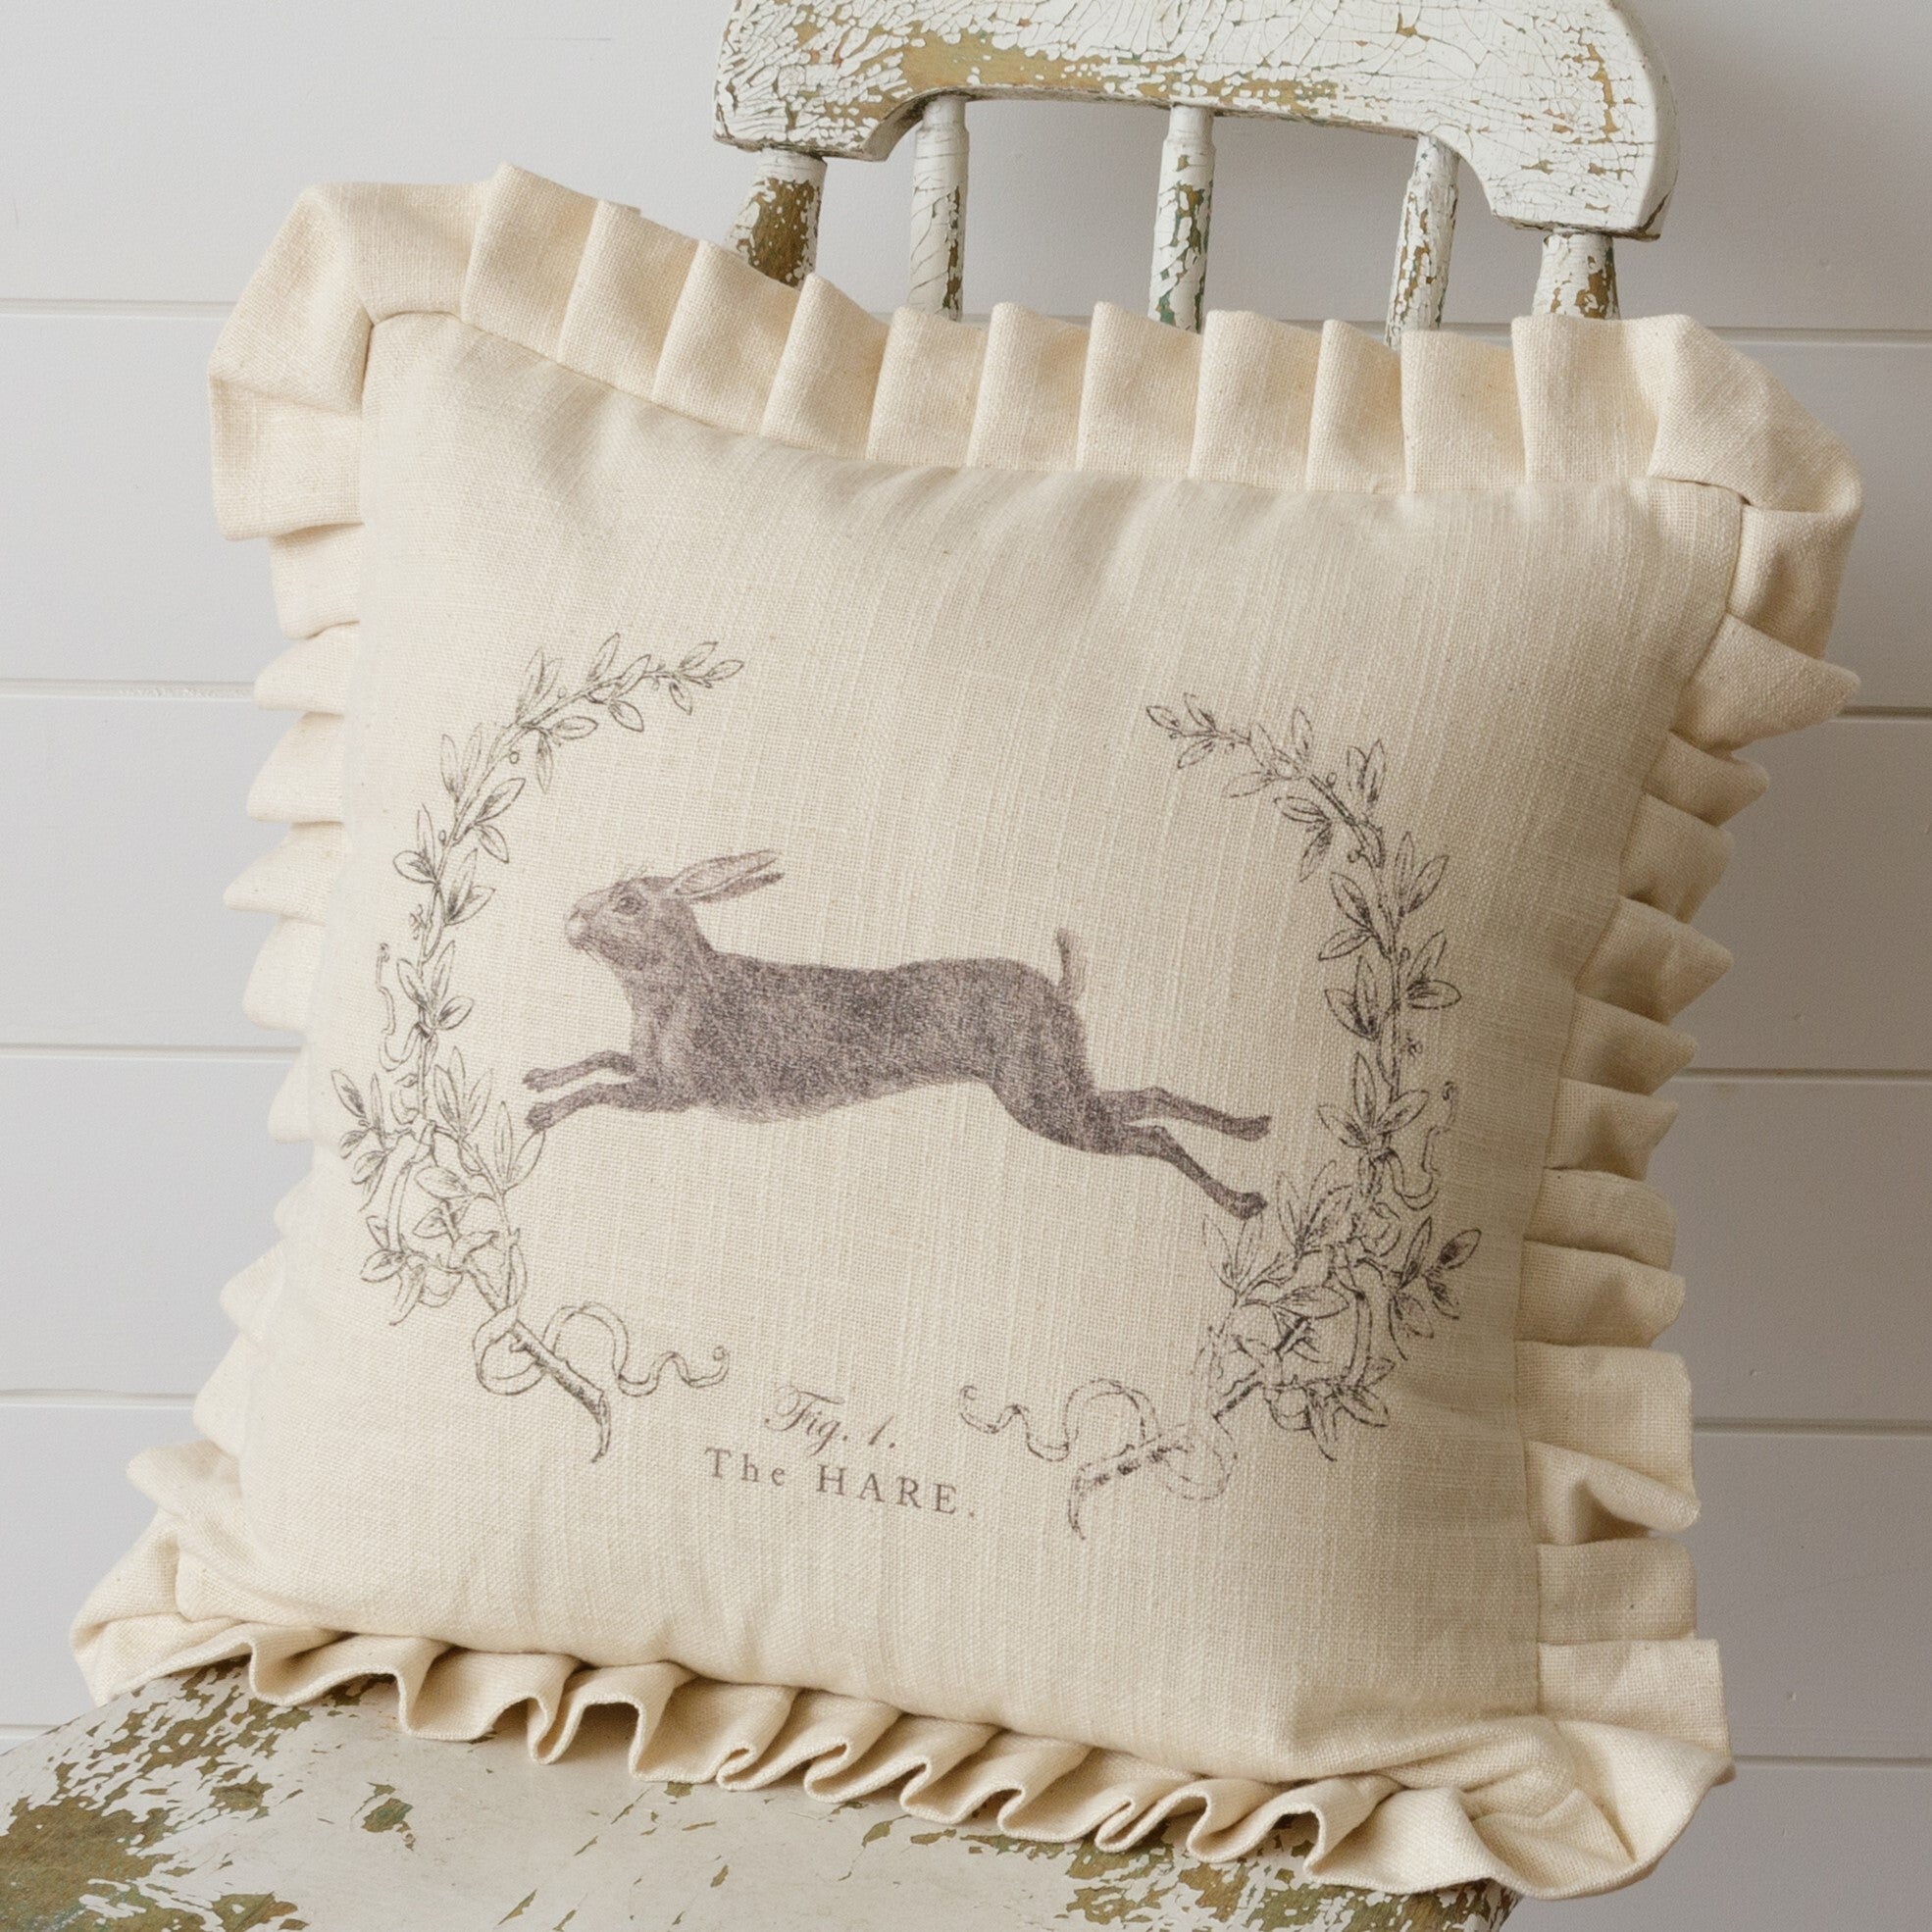 Leaping Hare Pillow w/ Ruffles